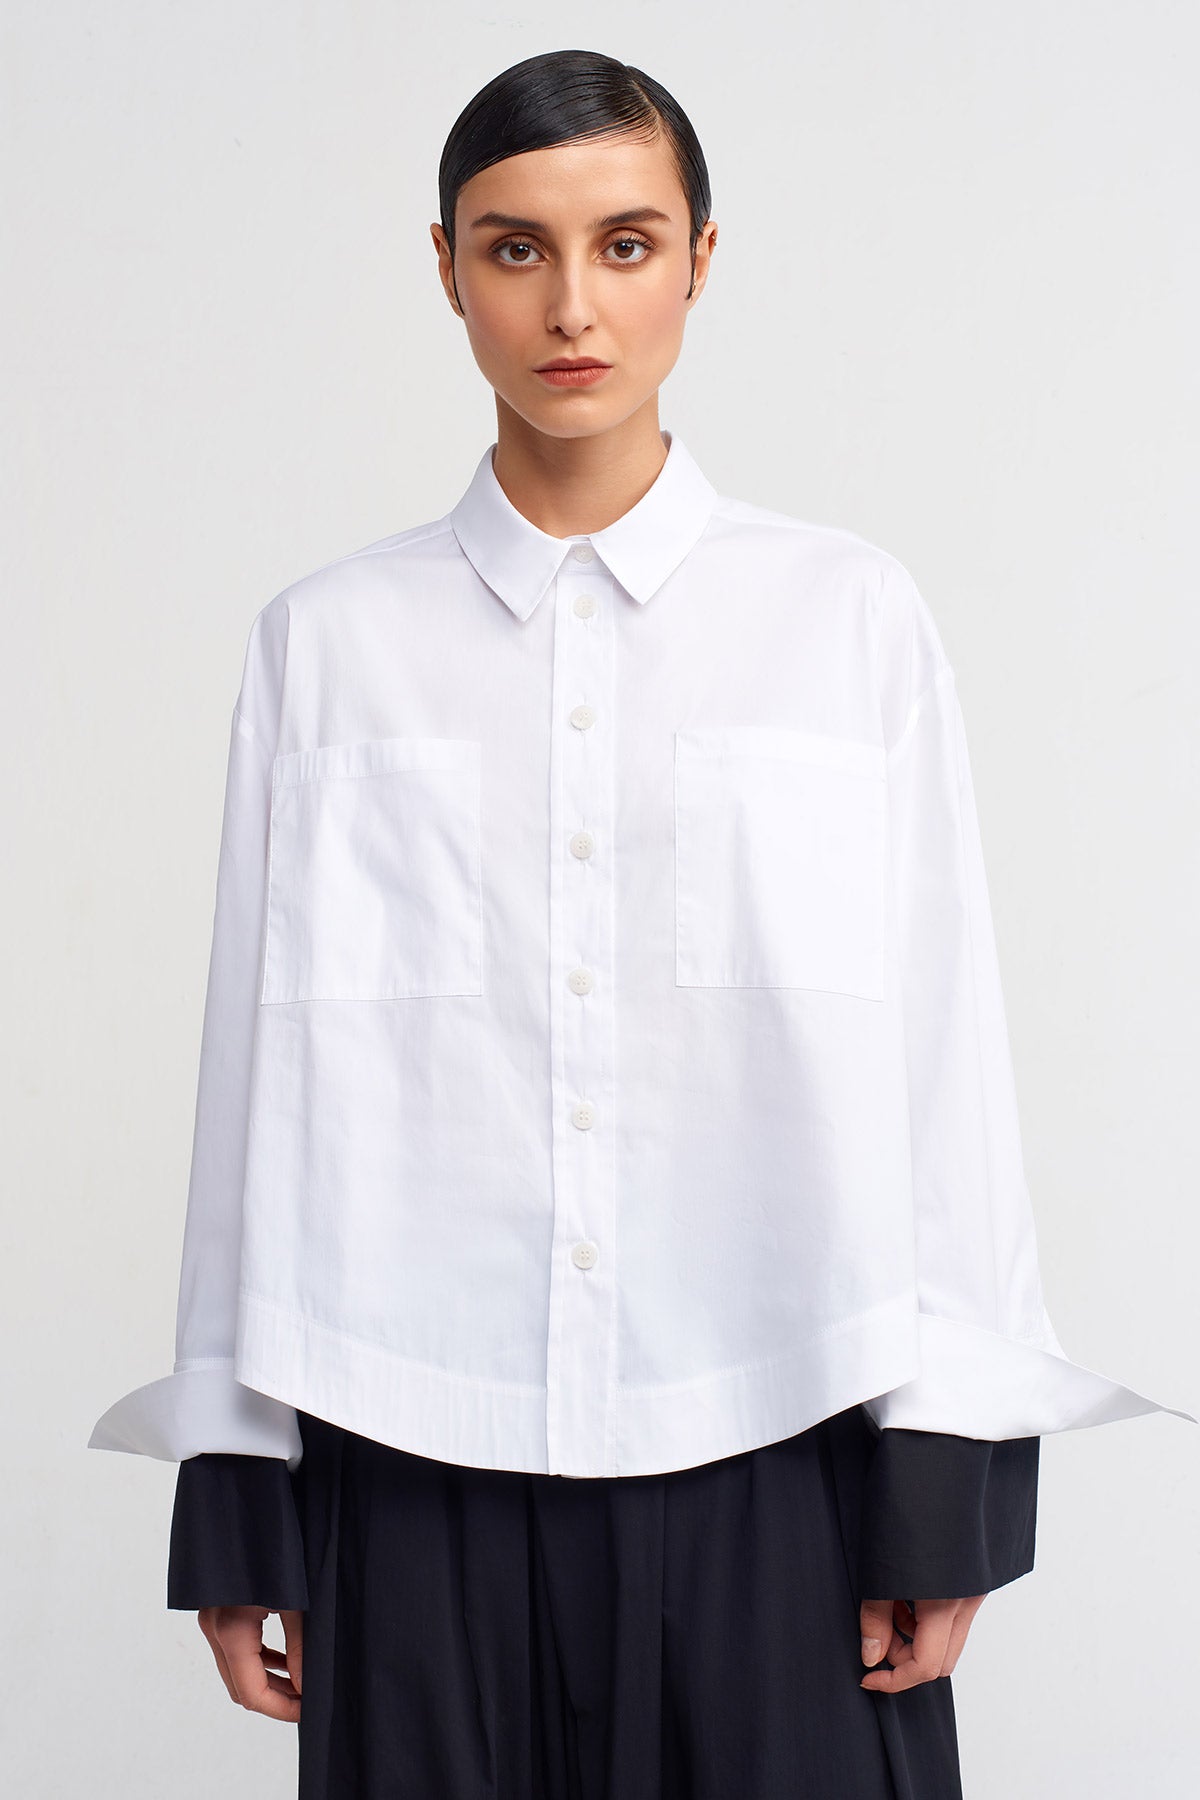 White / Black Oversized Shirt with Cuff in a Different Color-Y241011027